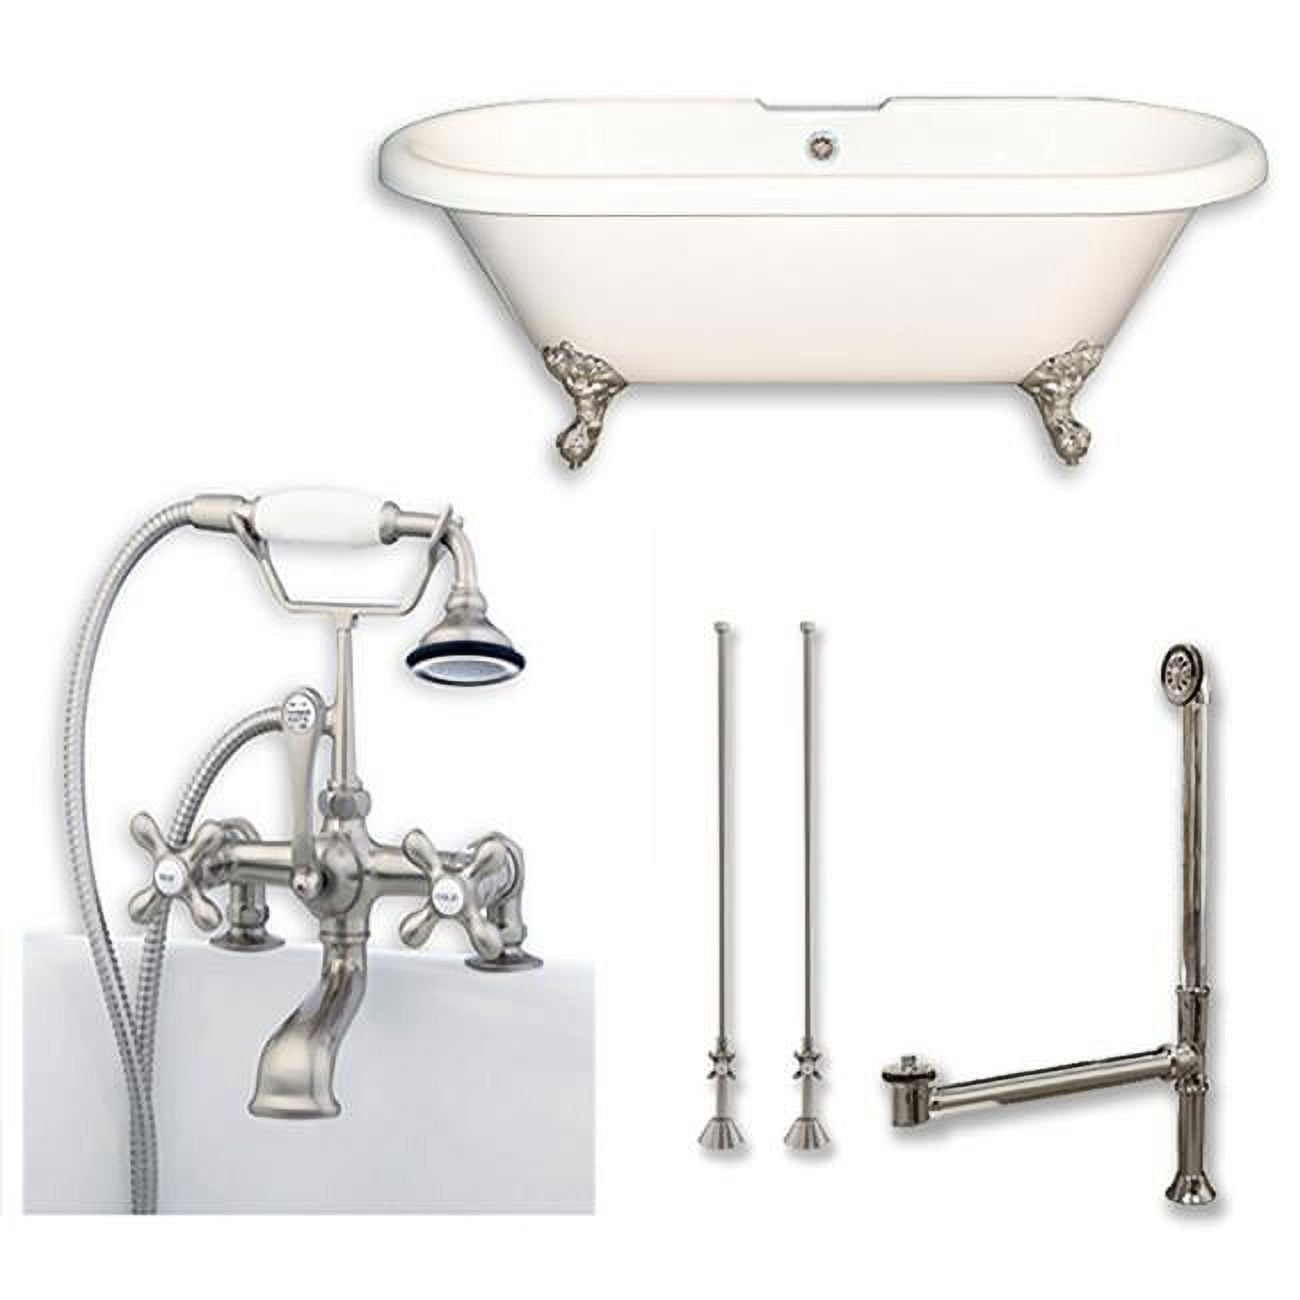 Ade60-463d-2-pkg-bn-7dh 60 X 30 In. Acrylic Double Ended Clawfoot Bathtub With 7 In. Deck Mount Faucet Drillings & Brushed Nickel Plumbing